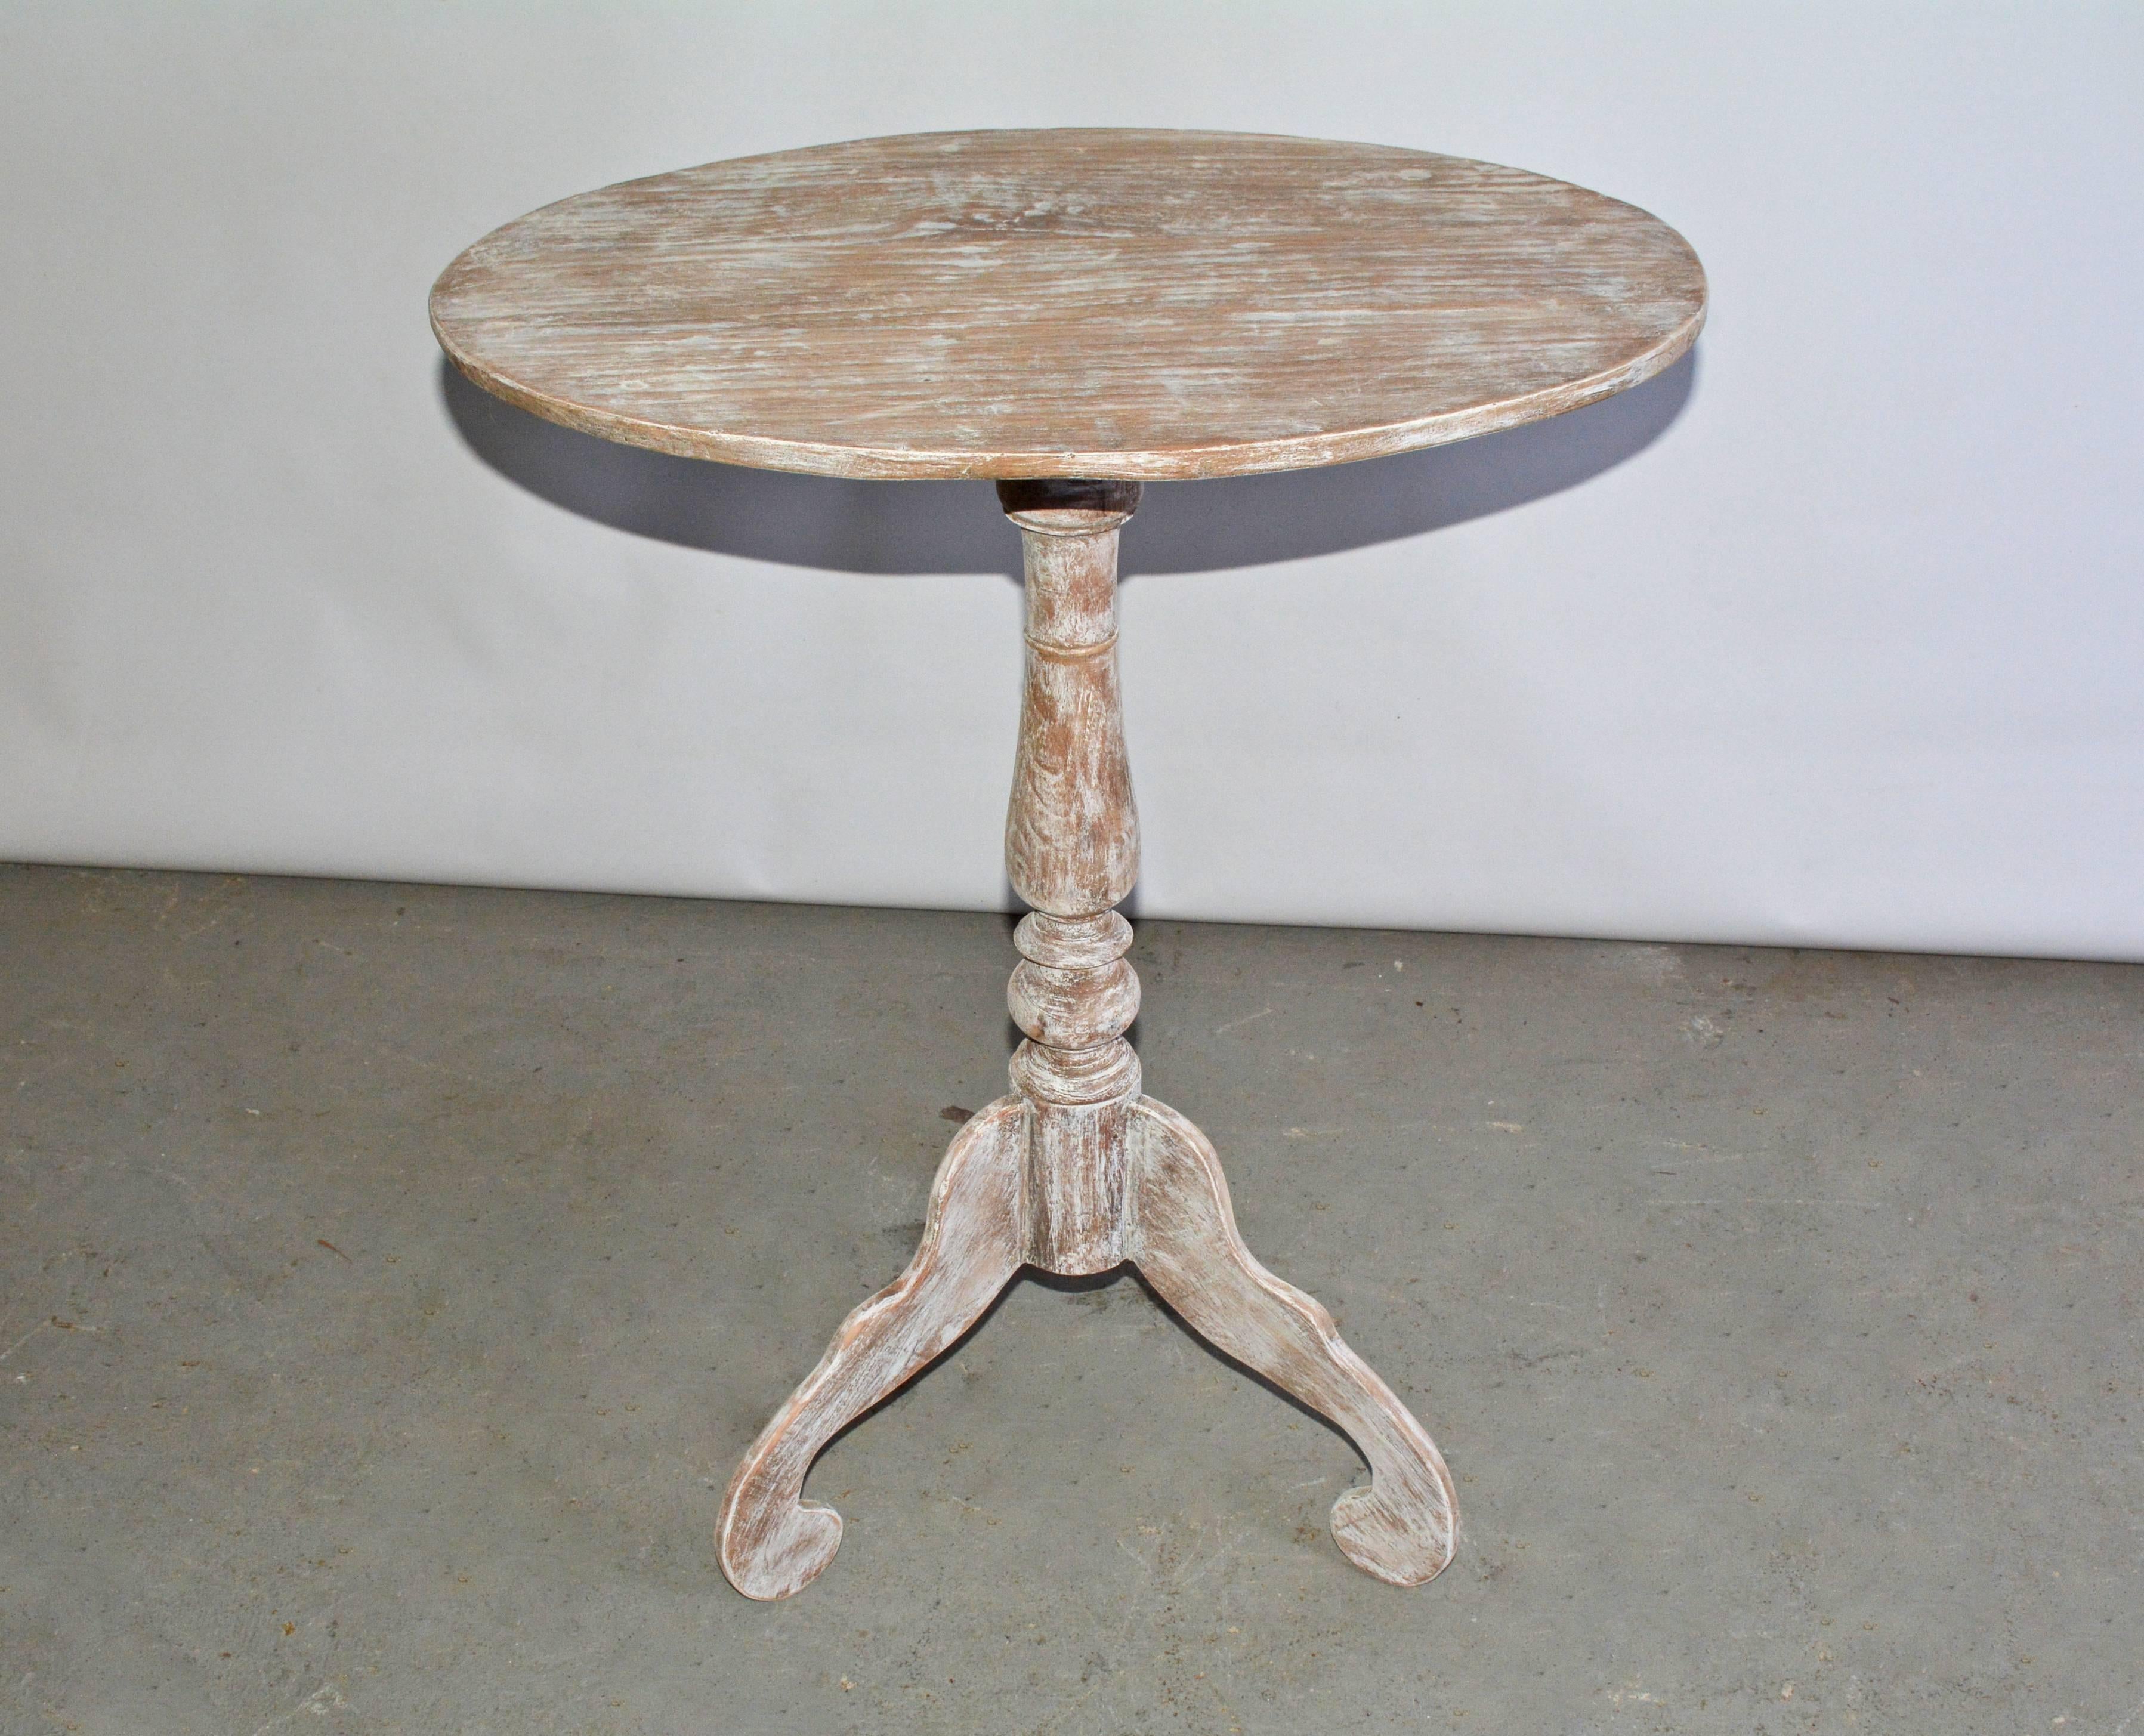 Pair of oval Gustavian or Swedish style teak pedestal tables. Rustic white washed with handcrafted turned base and beautifully carved legs. Perfect as night table, end table, occasional table, tea or wine table. Can be sold singly.